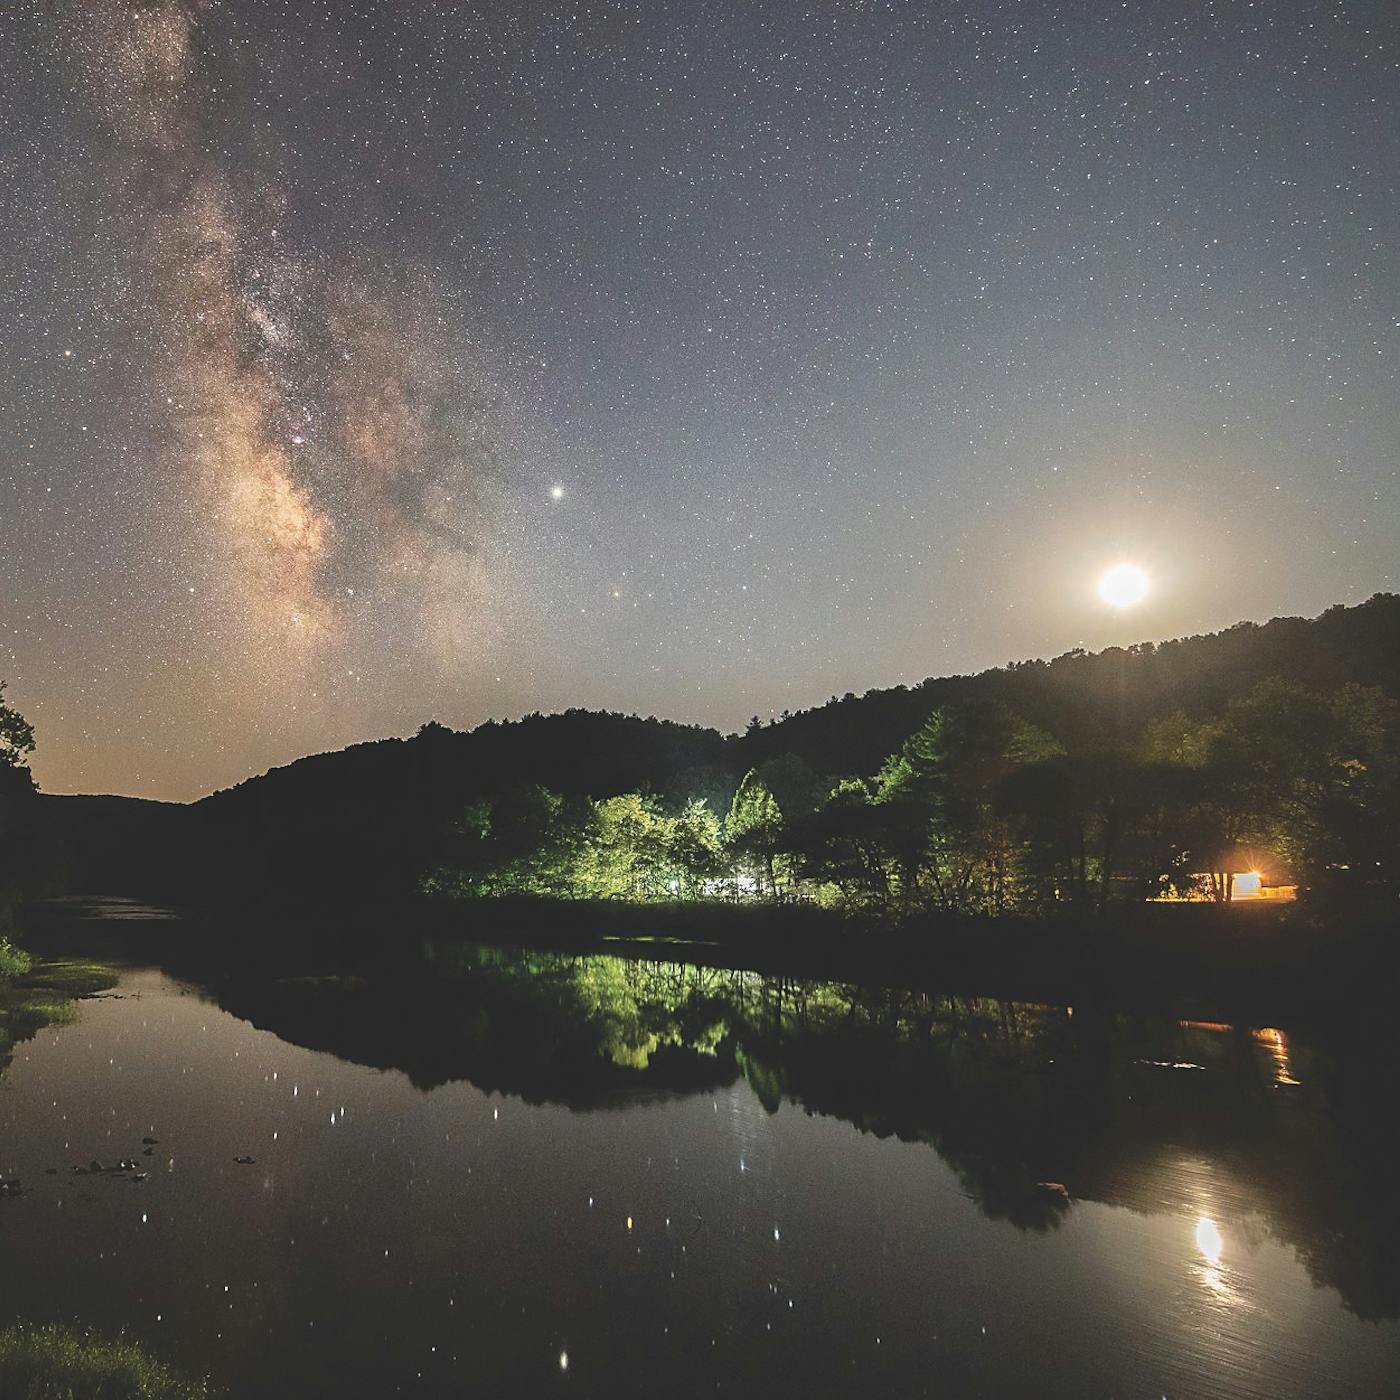 Night sky reflected in lake at Watoga State Park in Pocahontas County, West Virginia (photo by Jessie Thornton))